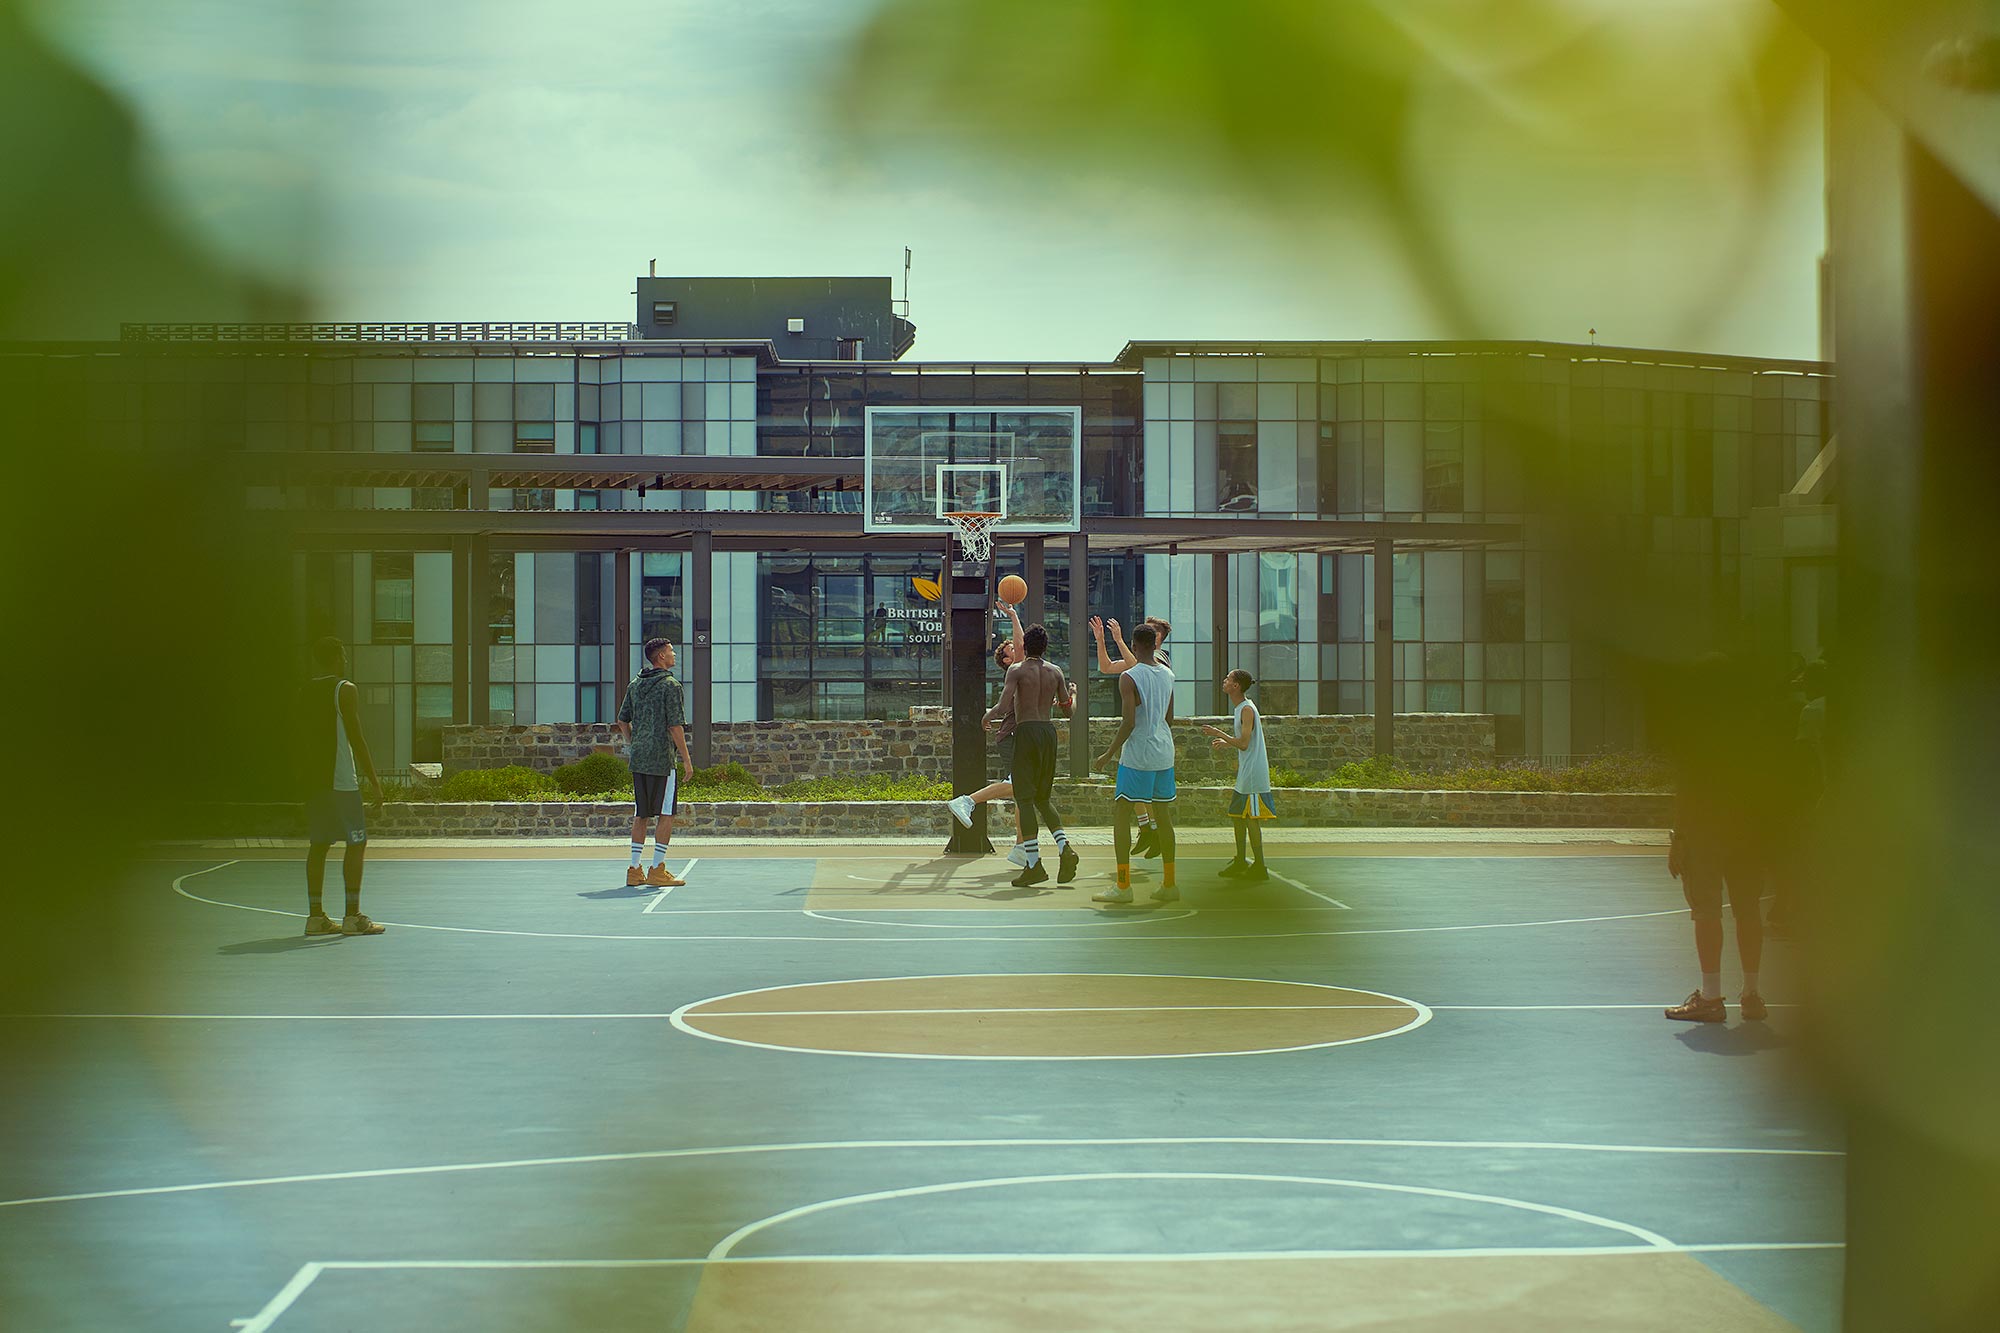 Tissot T-Touch Connect, a new Swiss watch, is showcased in an outdoor setting on a hard court basketball court. The image features basketball players engaged in a game, illuminated by natural lighting. The photograph captures the dynamic and energetic atmosphere, highlighting the watch's sleek design and innovative features, perfectly combining style and functionality